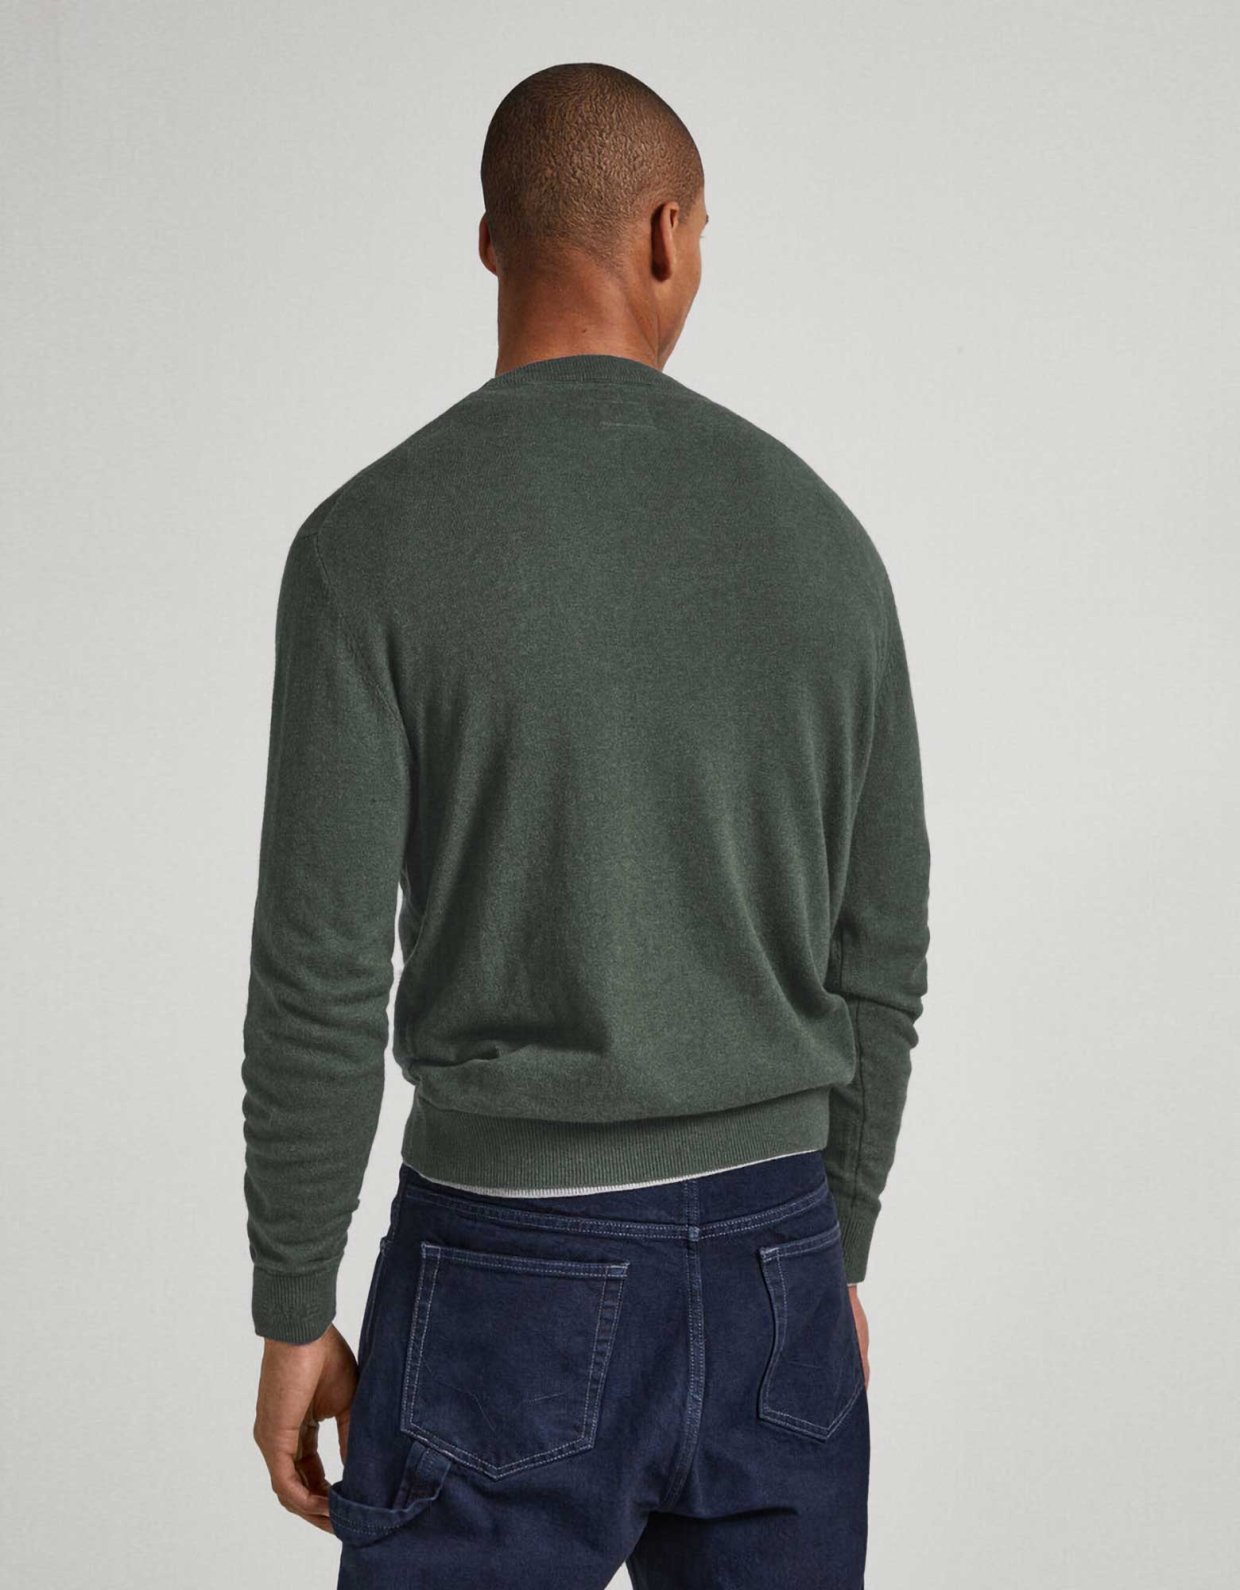 Pepe Jeans Andre crew neck olive